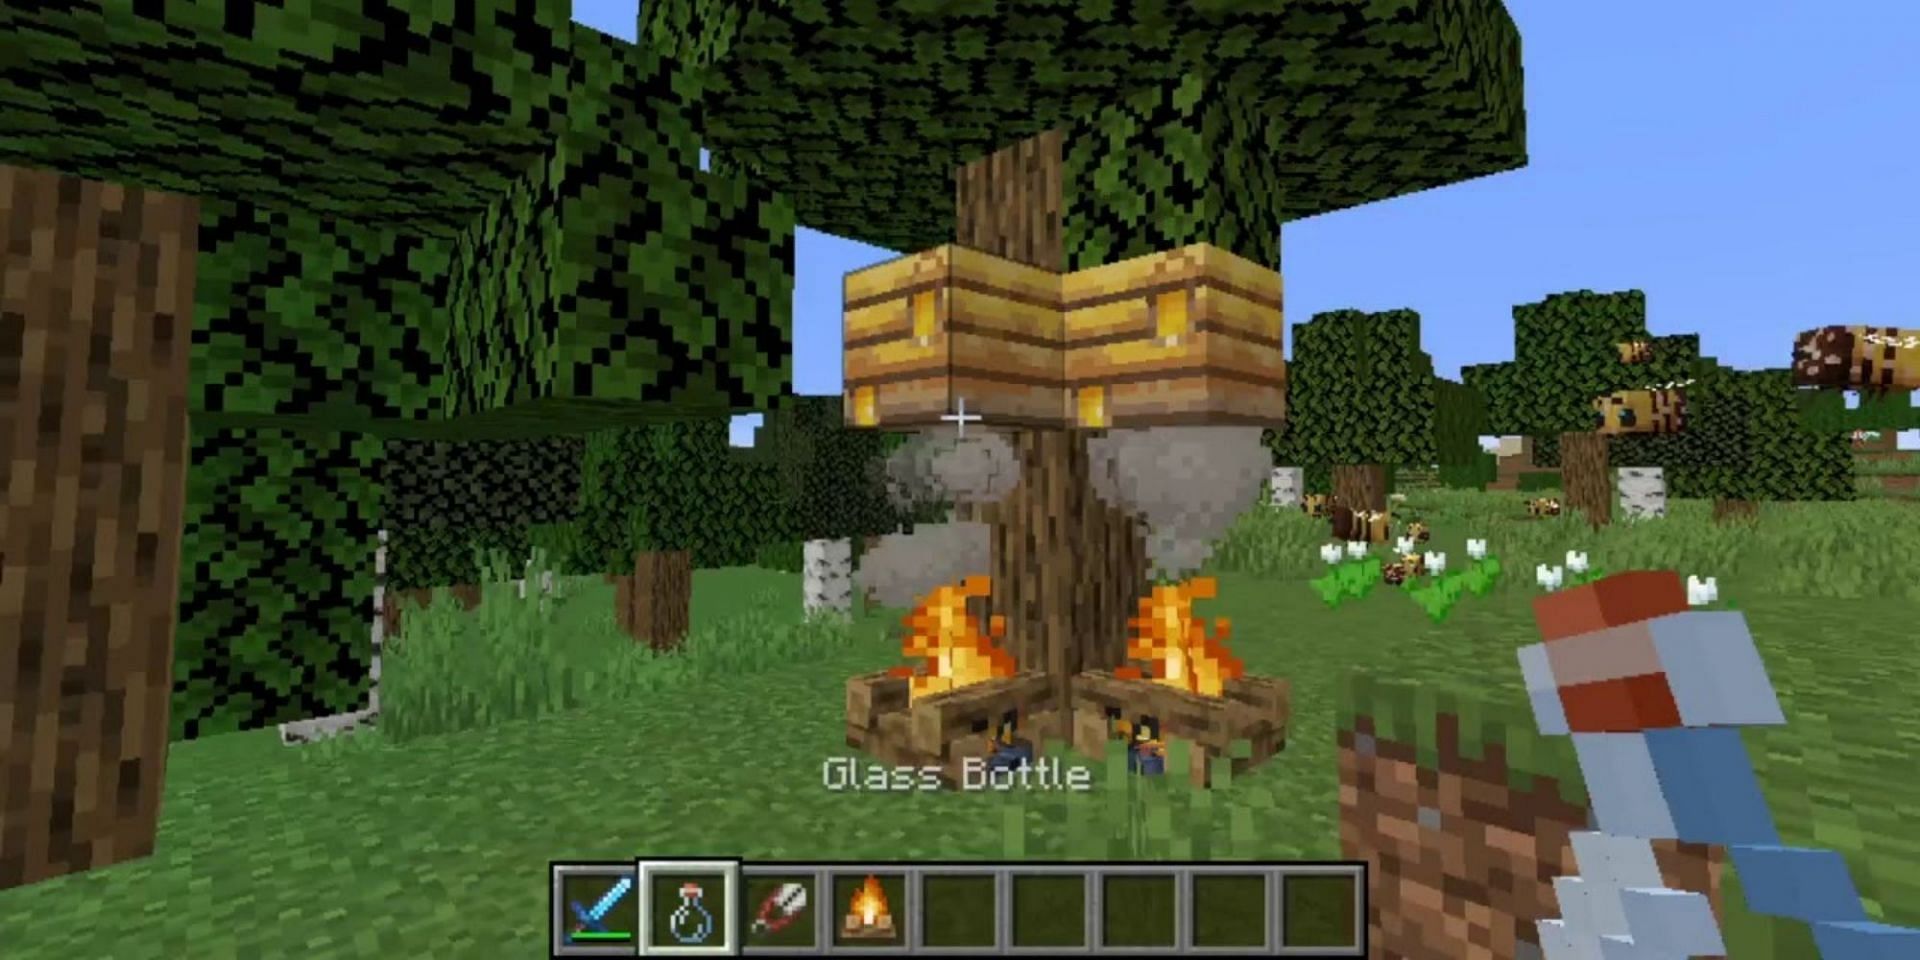 A campfire will appease the bees so players can get the honey and honeycombs (Image via Minecraft)